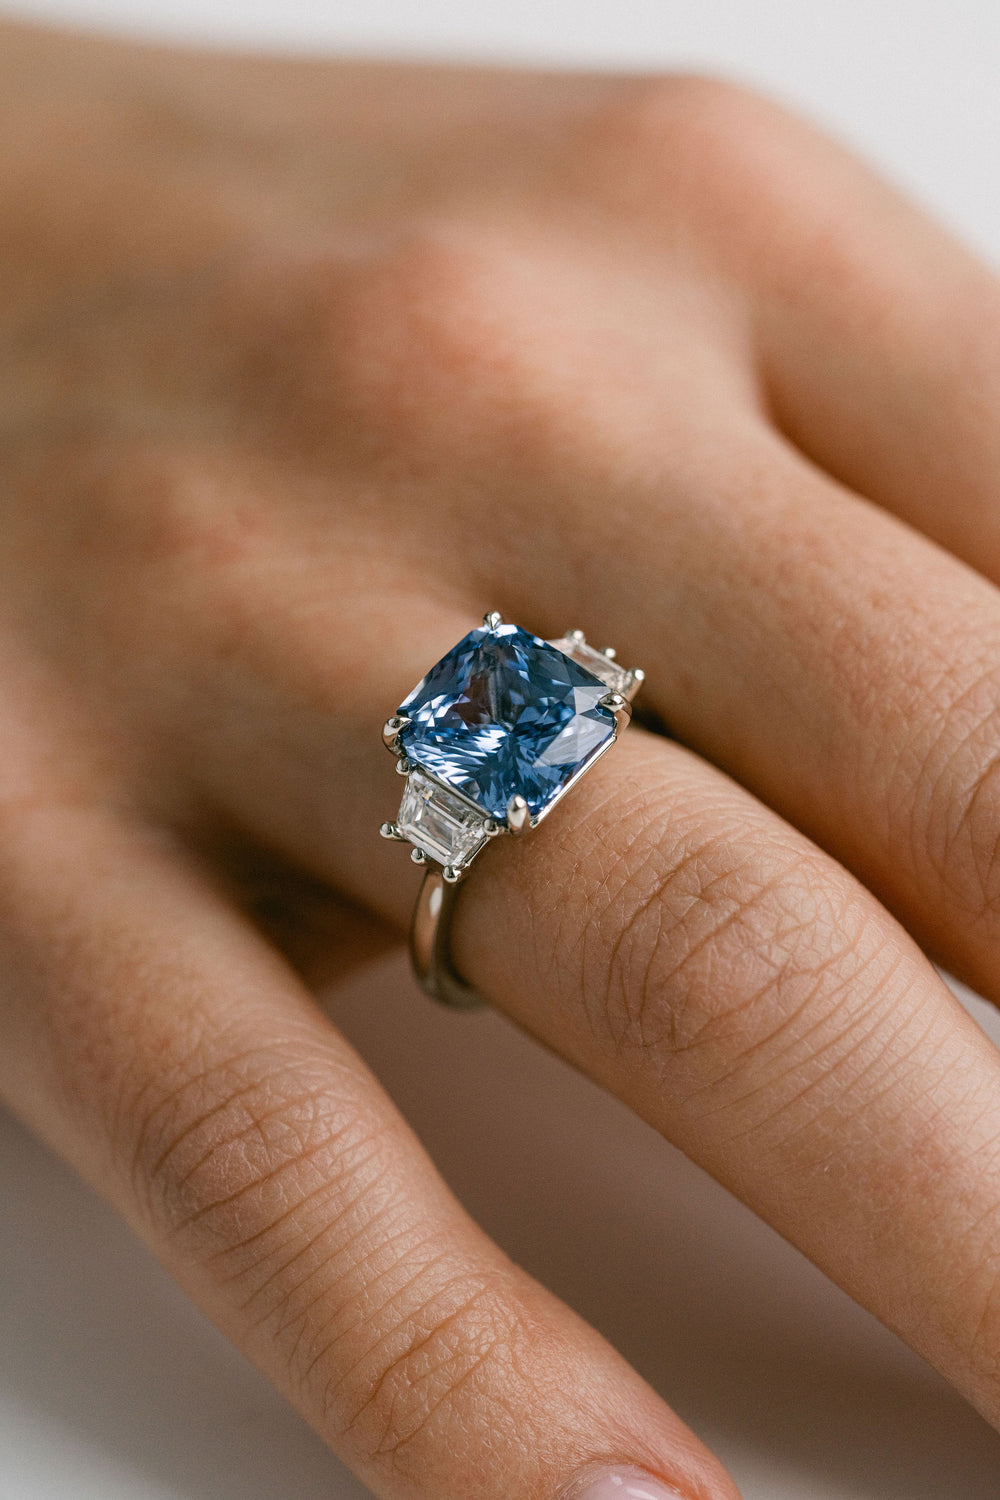 6.20ct Radiant Cut Blue Sri Lankan Sapphire With Trapezoid Diamond Accents, 14k White Gold